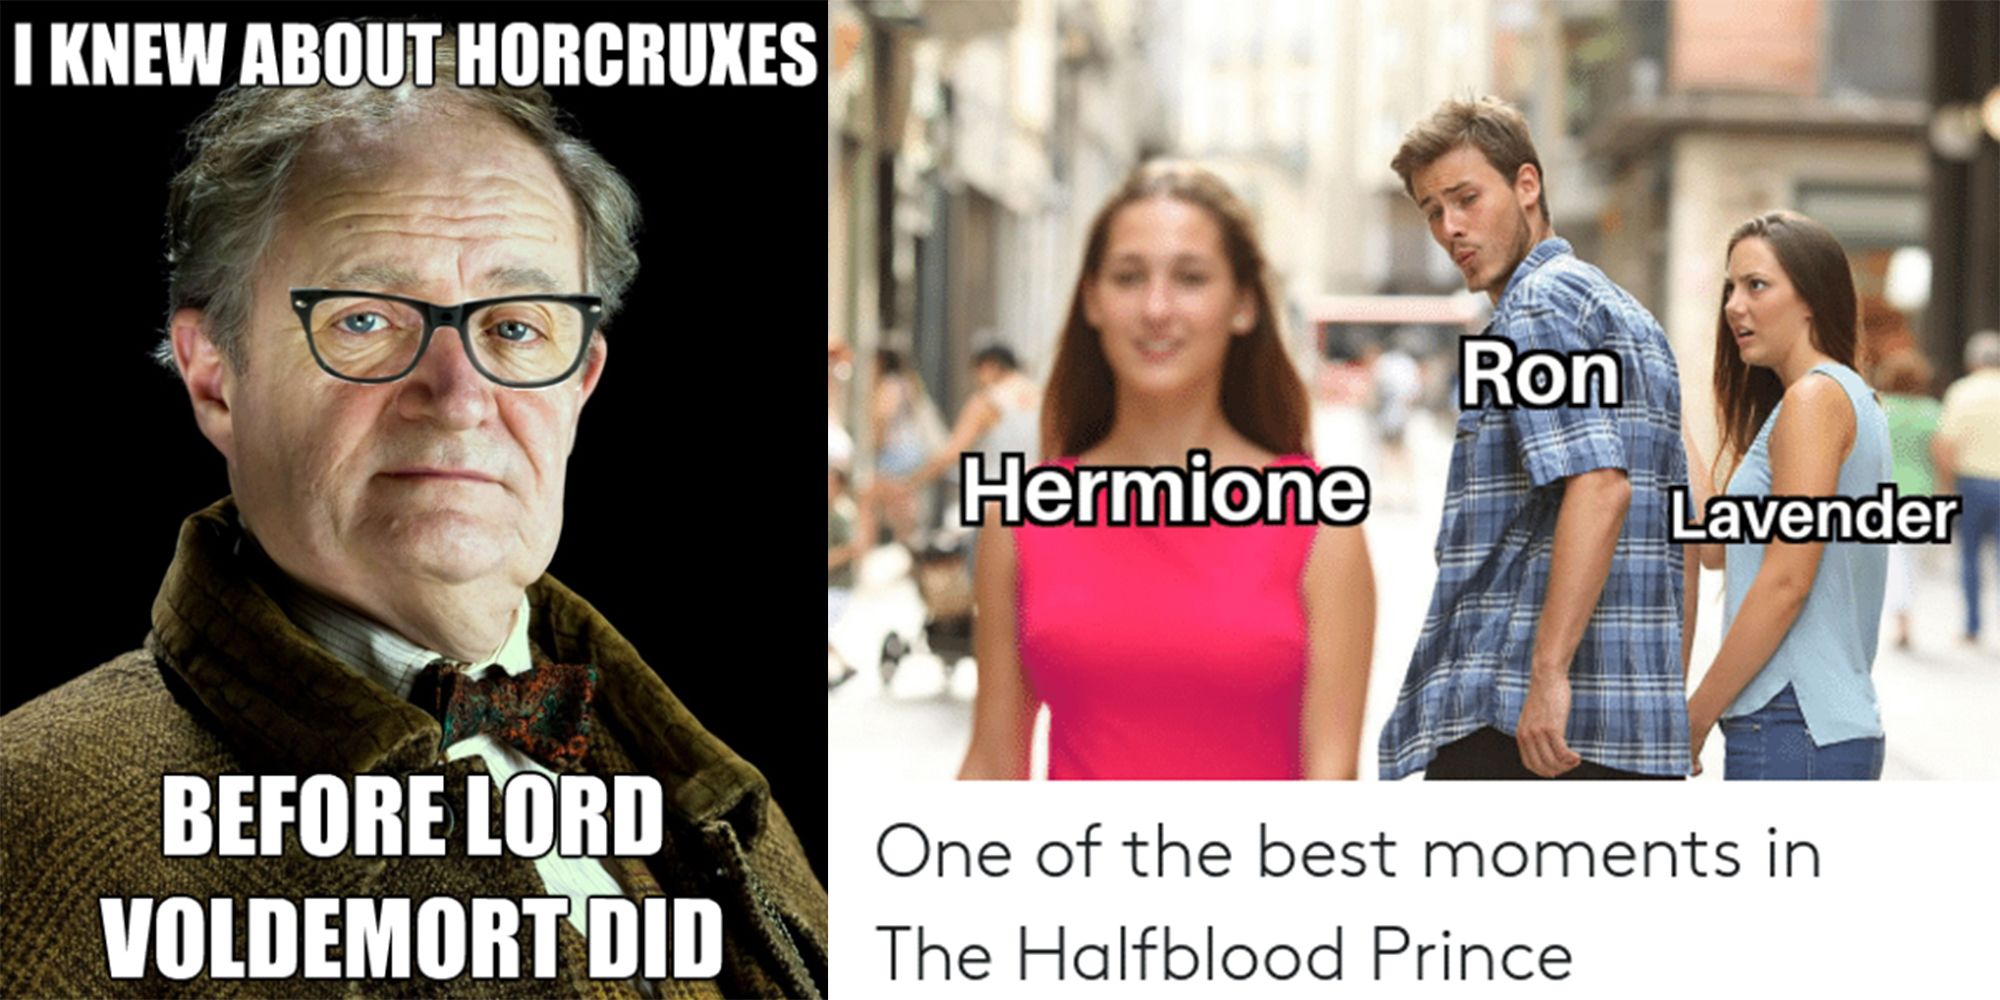 Laugh Out Loud with These Hilarious Harry Potter Memes